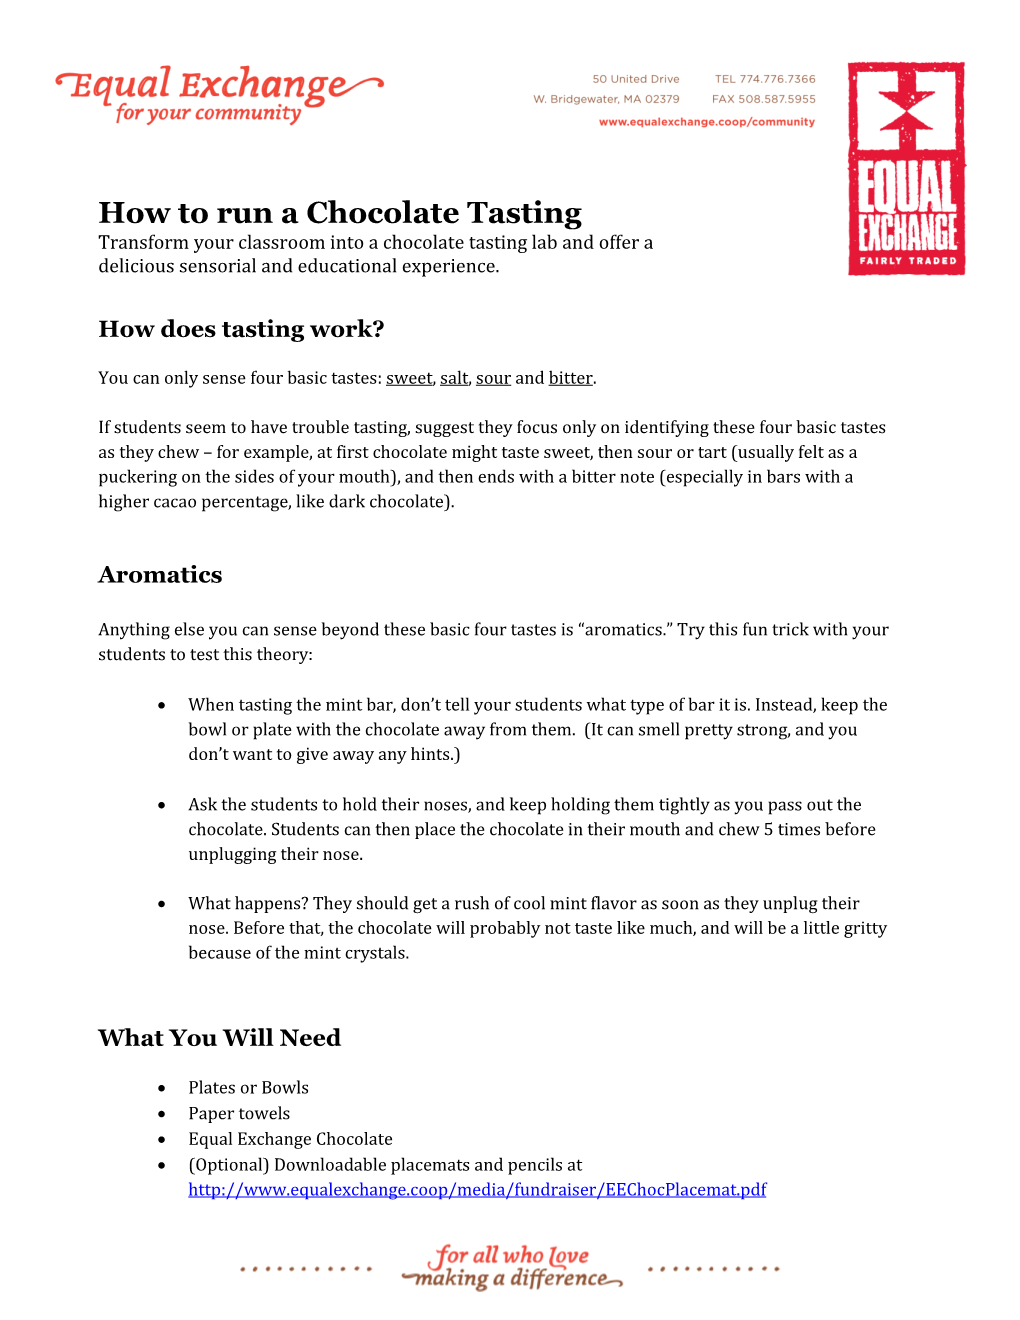 How to Run a Chocolate Tasting Transform Your Classroom Into a Chocolate Tasting Lab and Offer a Delicious Sensorial and Educational Experience